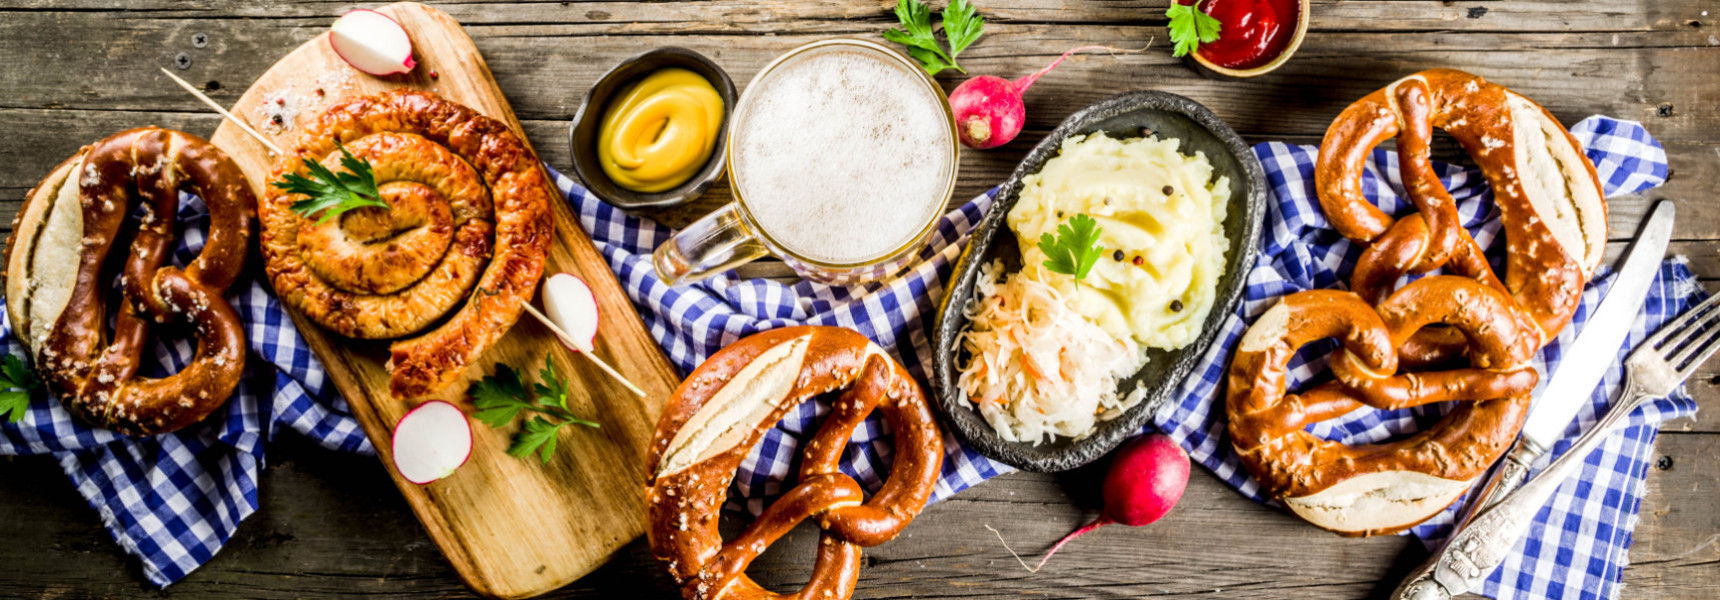 Munich Food and Drink Tours